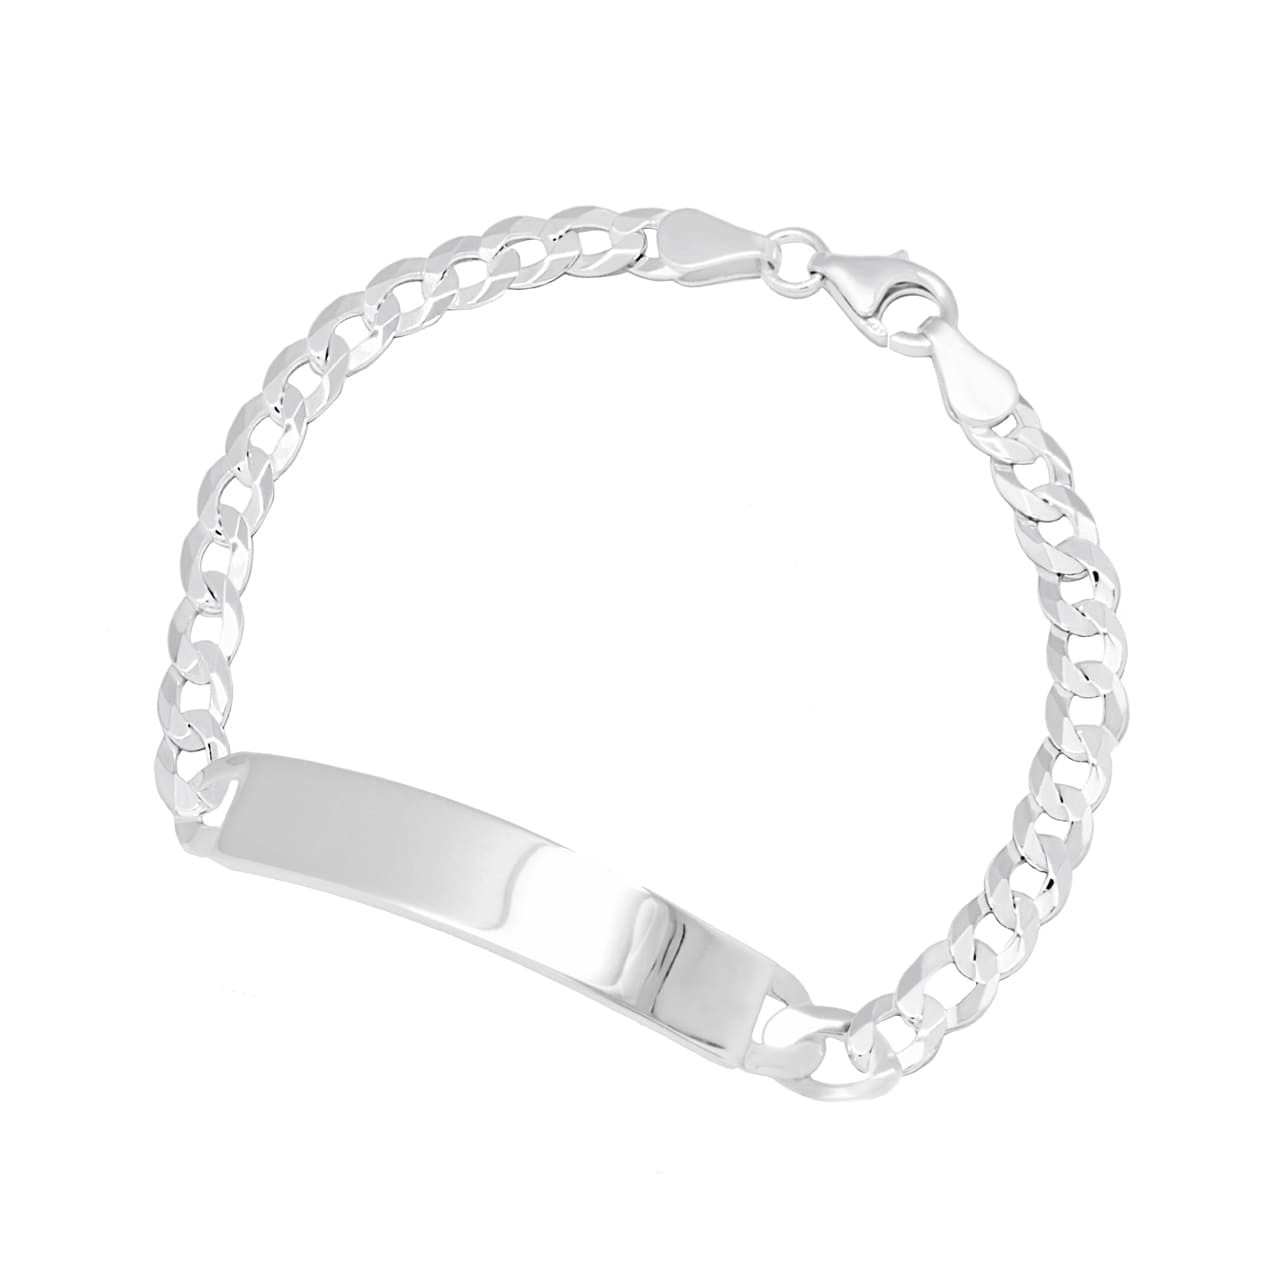 ID-Armband Panzer 8.0 mm, 925 Sterling Silber